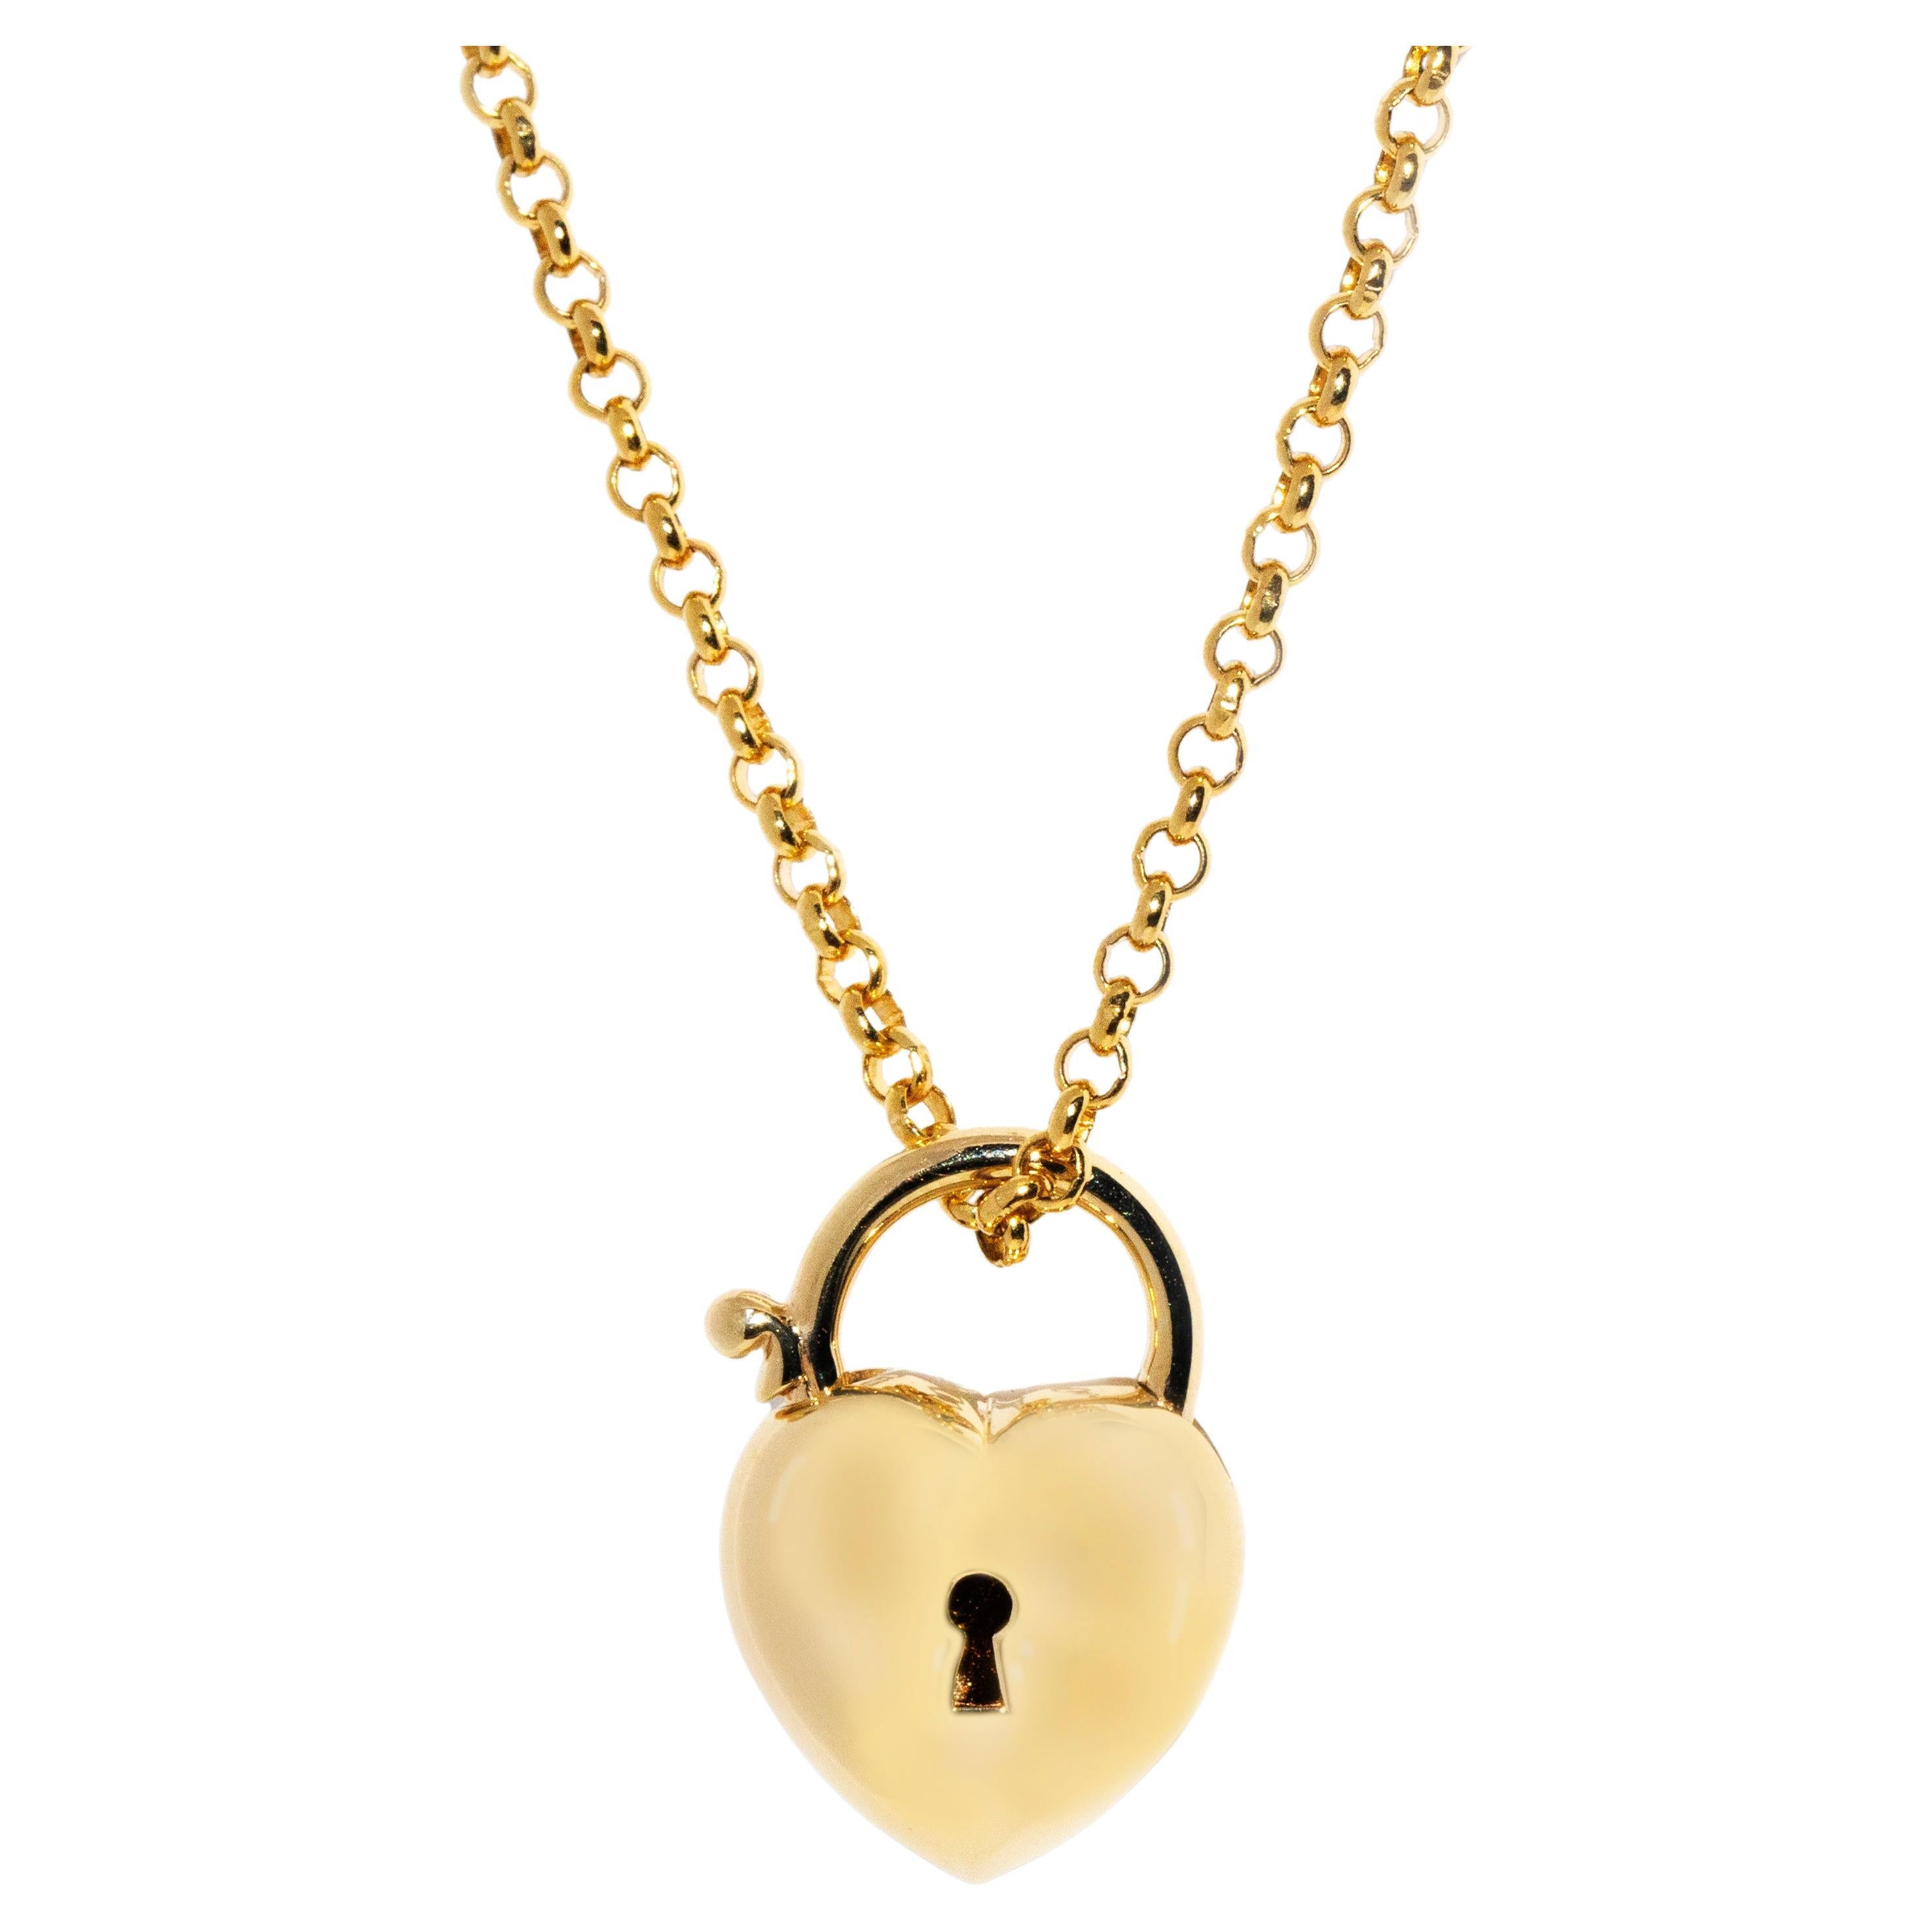 Vintage circa 1990s Heart Shaped Padlock Pendant & Chain 9 Carat Yellow Gold For Sale